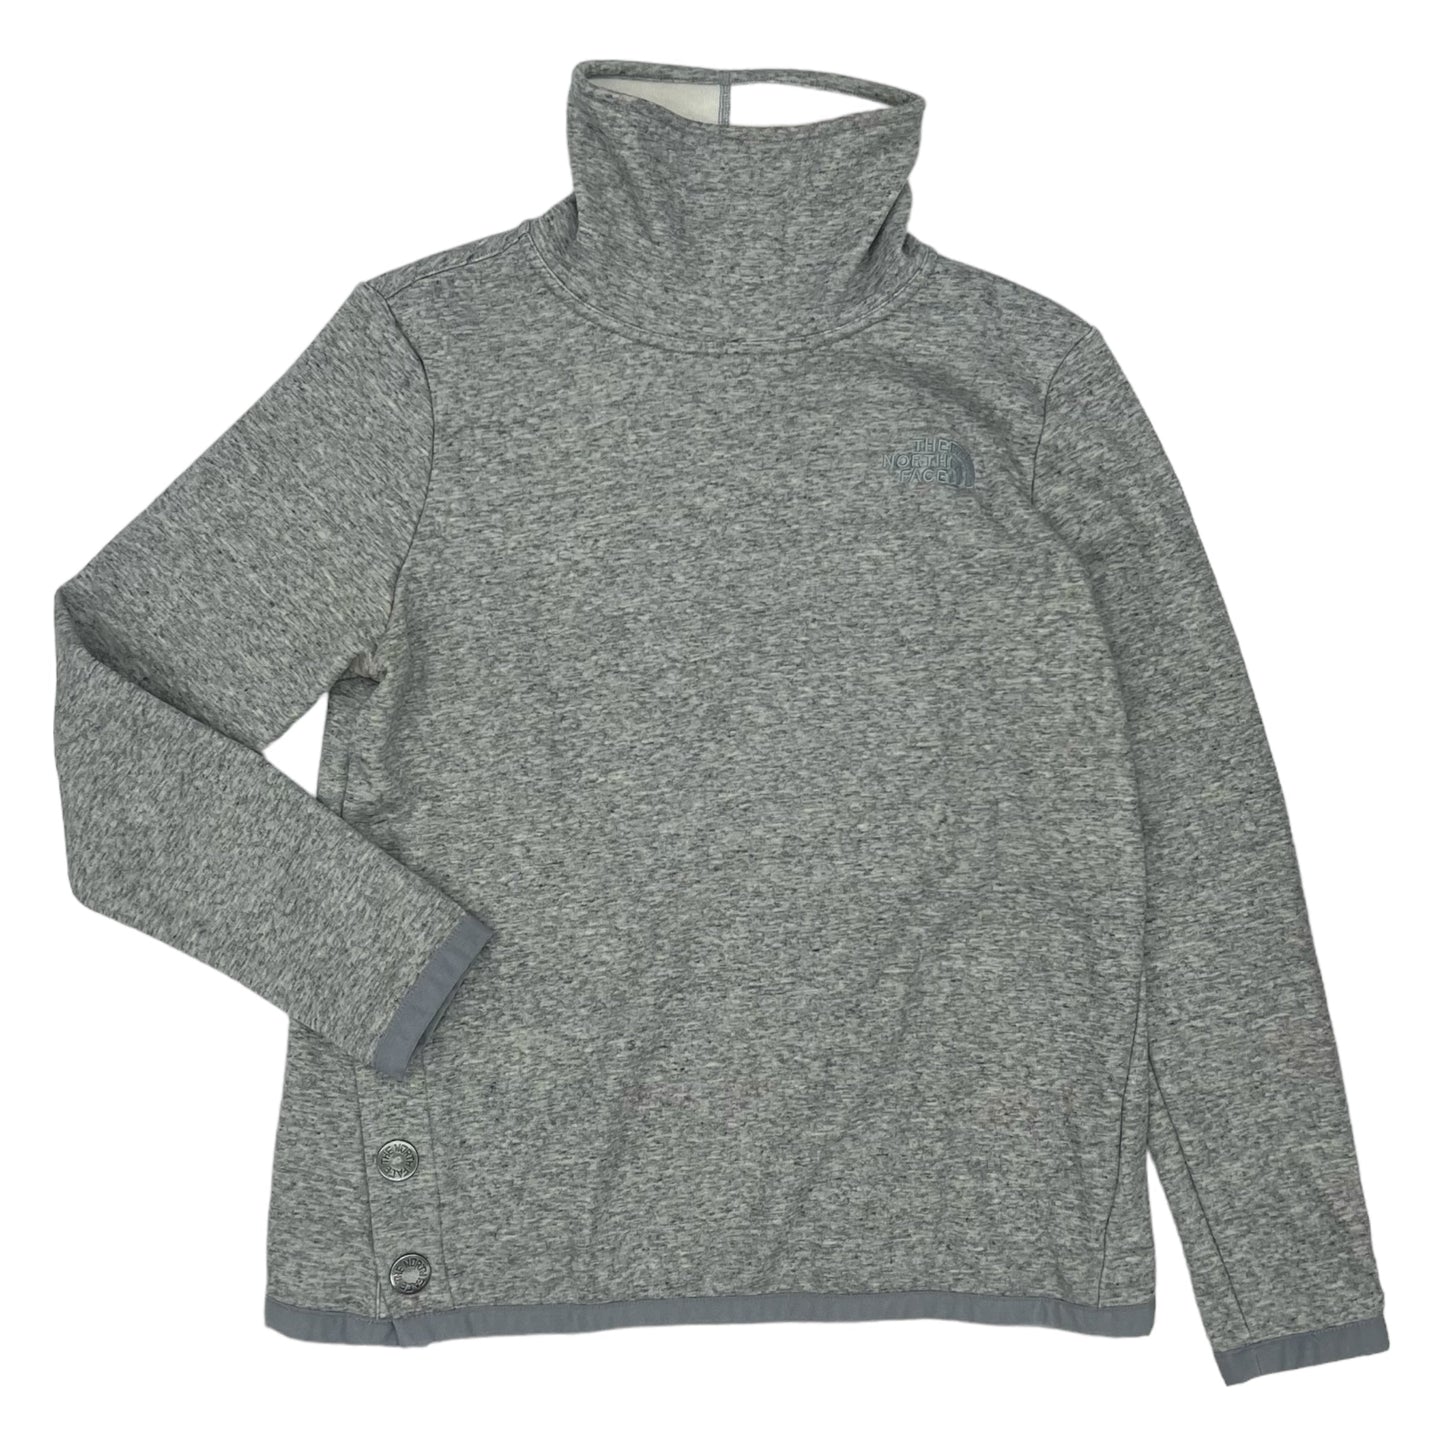 Athletic Sweatshirt Collar By The North Face  Size: M